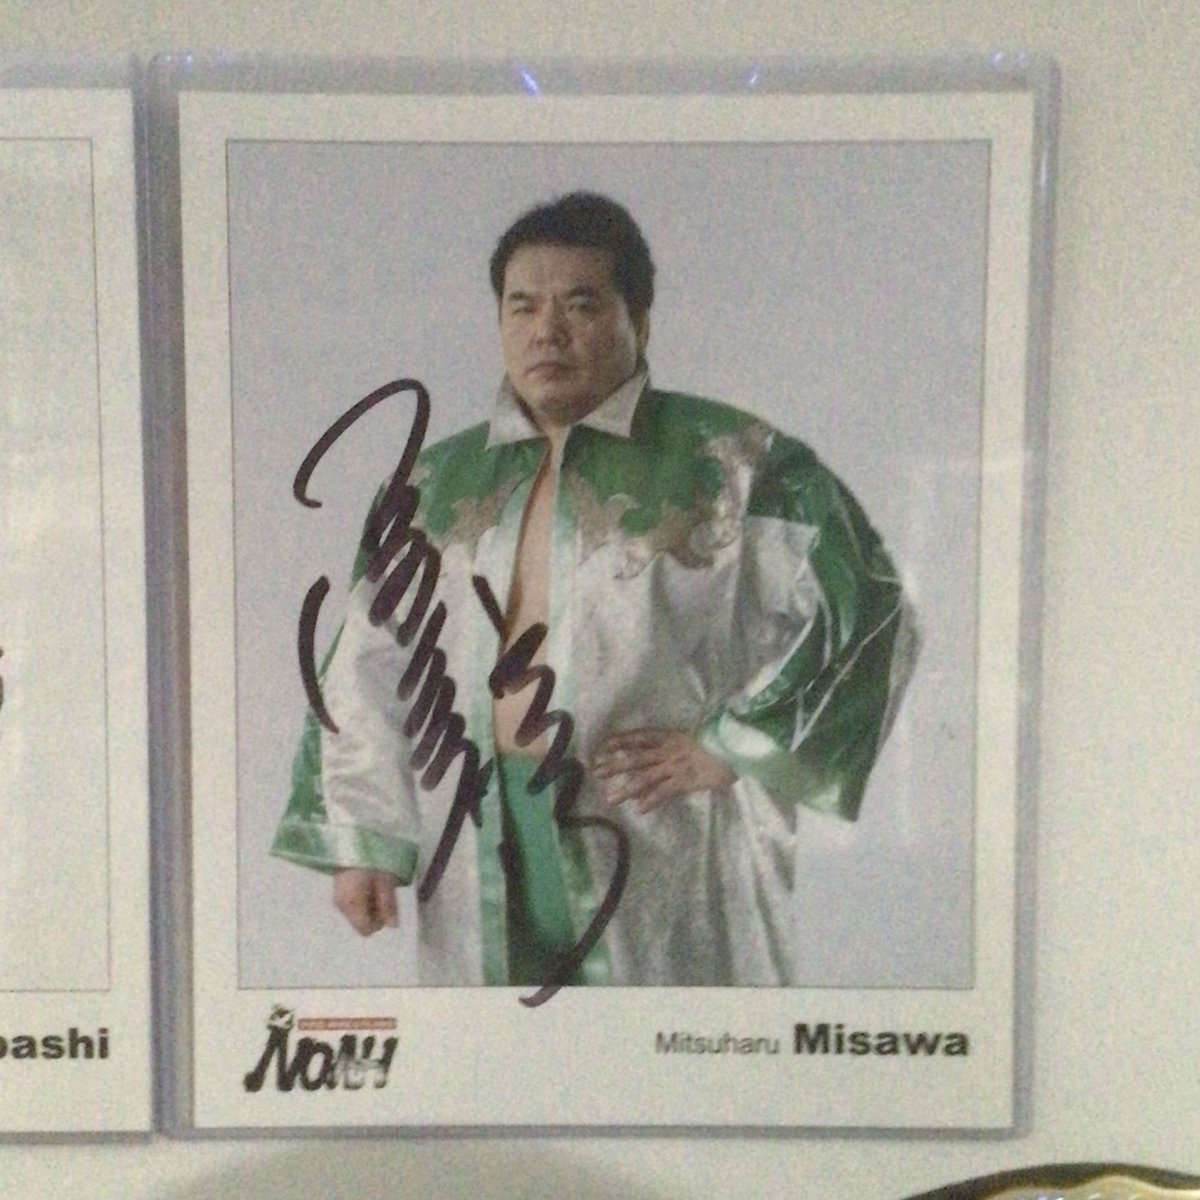 14 years today since the world lost Mitsuharu Misawa, undoubtedly top 5 greatest wrestlers of all time. The wrestling world truly wouldn’t be the same without him.

Last year I was lucky enough to find my holy grail, a signed portrait from him. It means the world to me 💚🤍